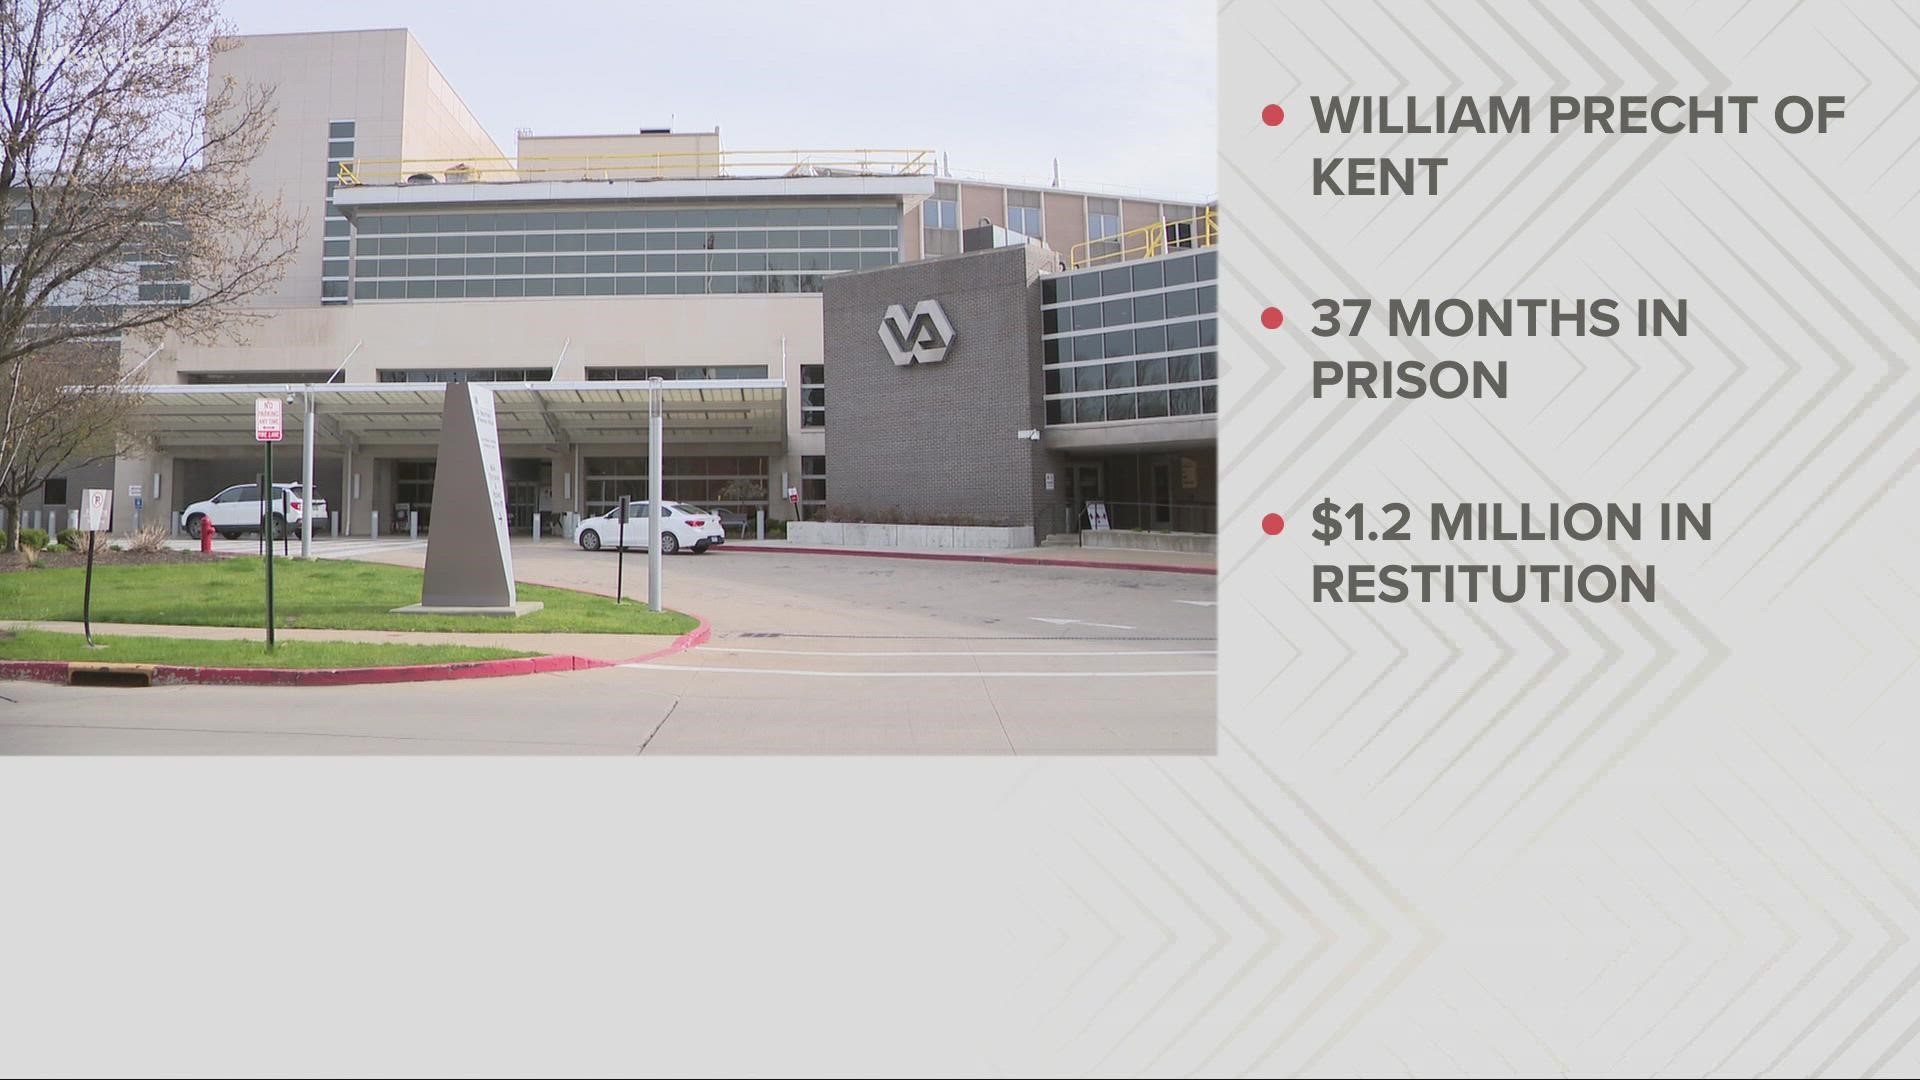 Precht was found guilty of using his position with the VA center to fraudulently make purchases.